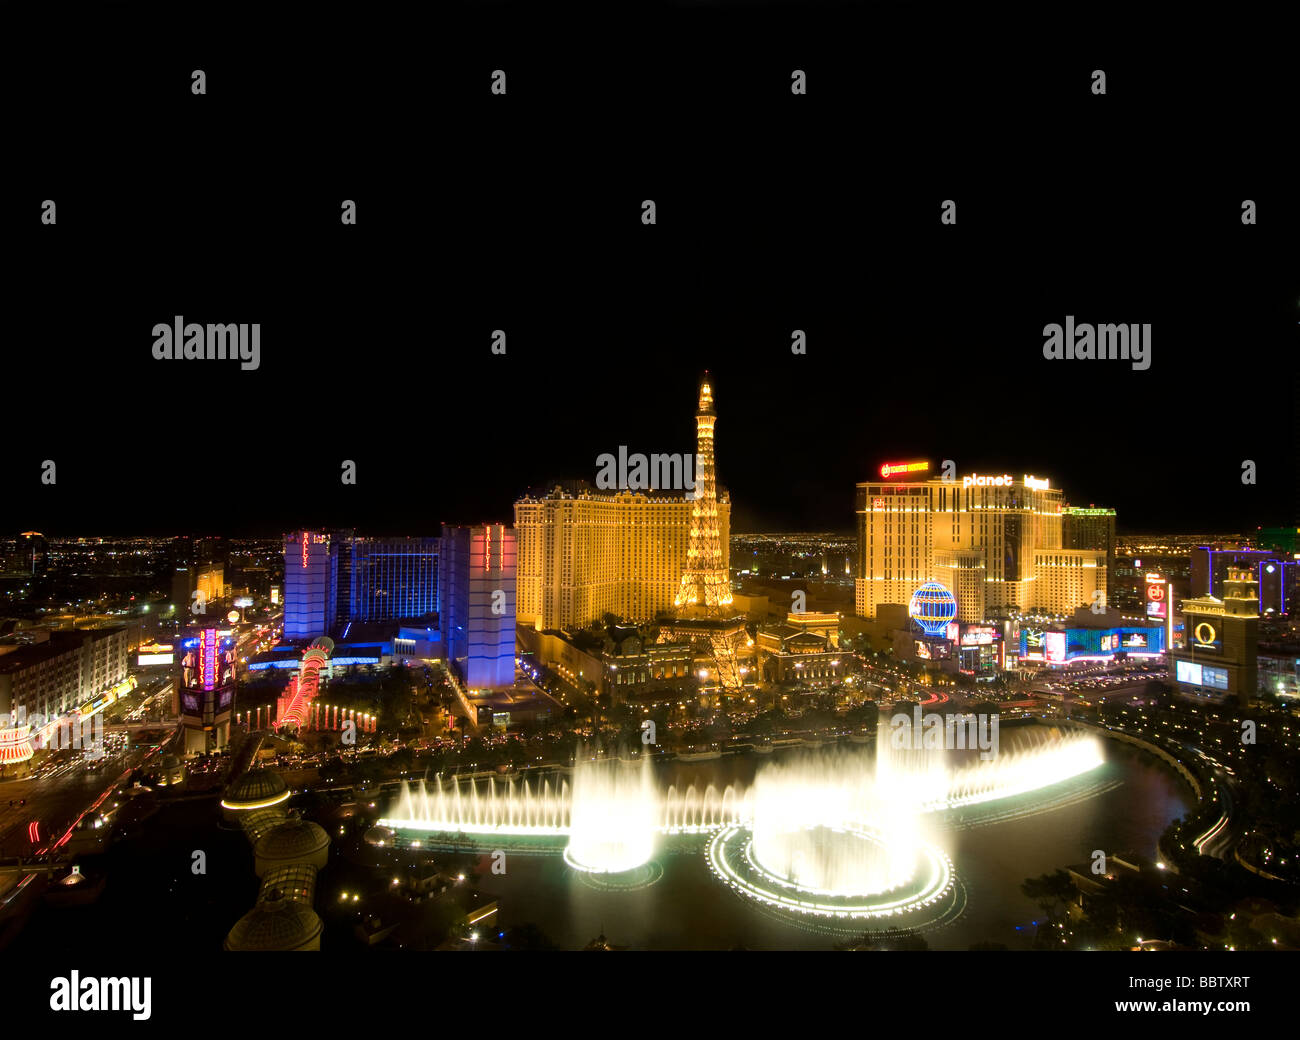 The Bellagio Hotel and casino fountains from above overlooking the Las Vegas strip Stock Photo